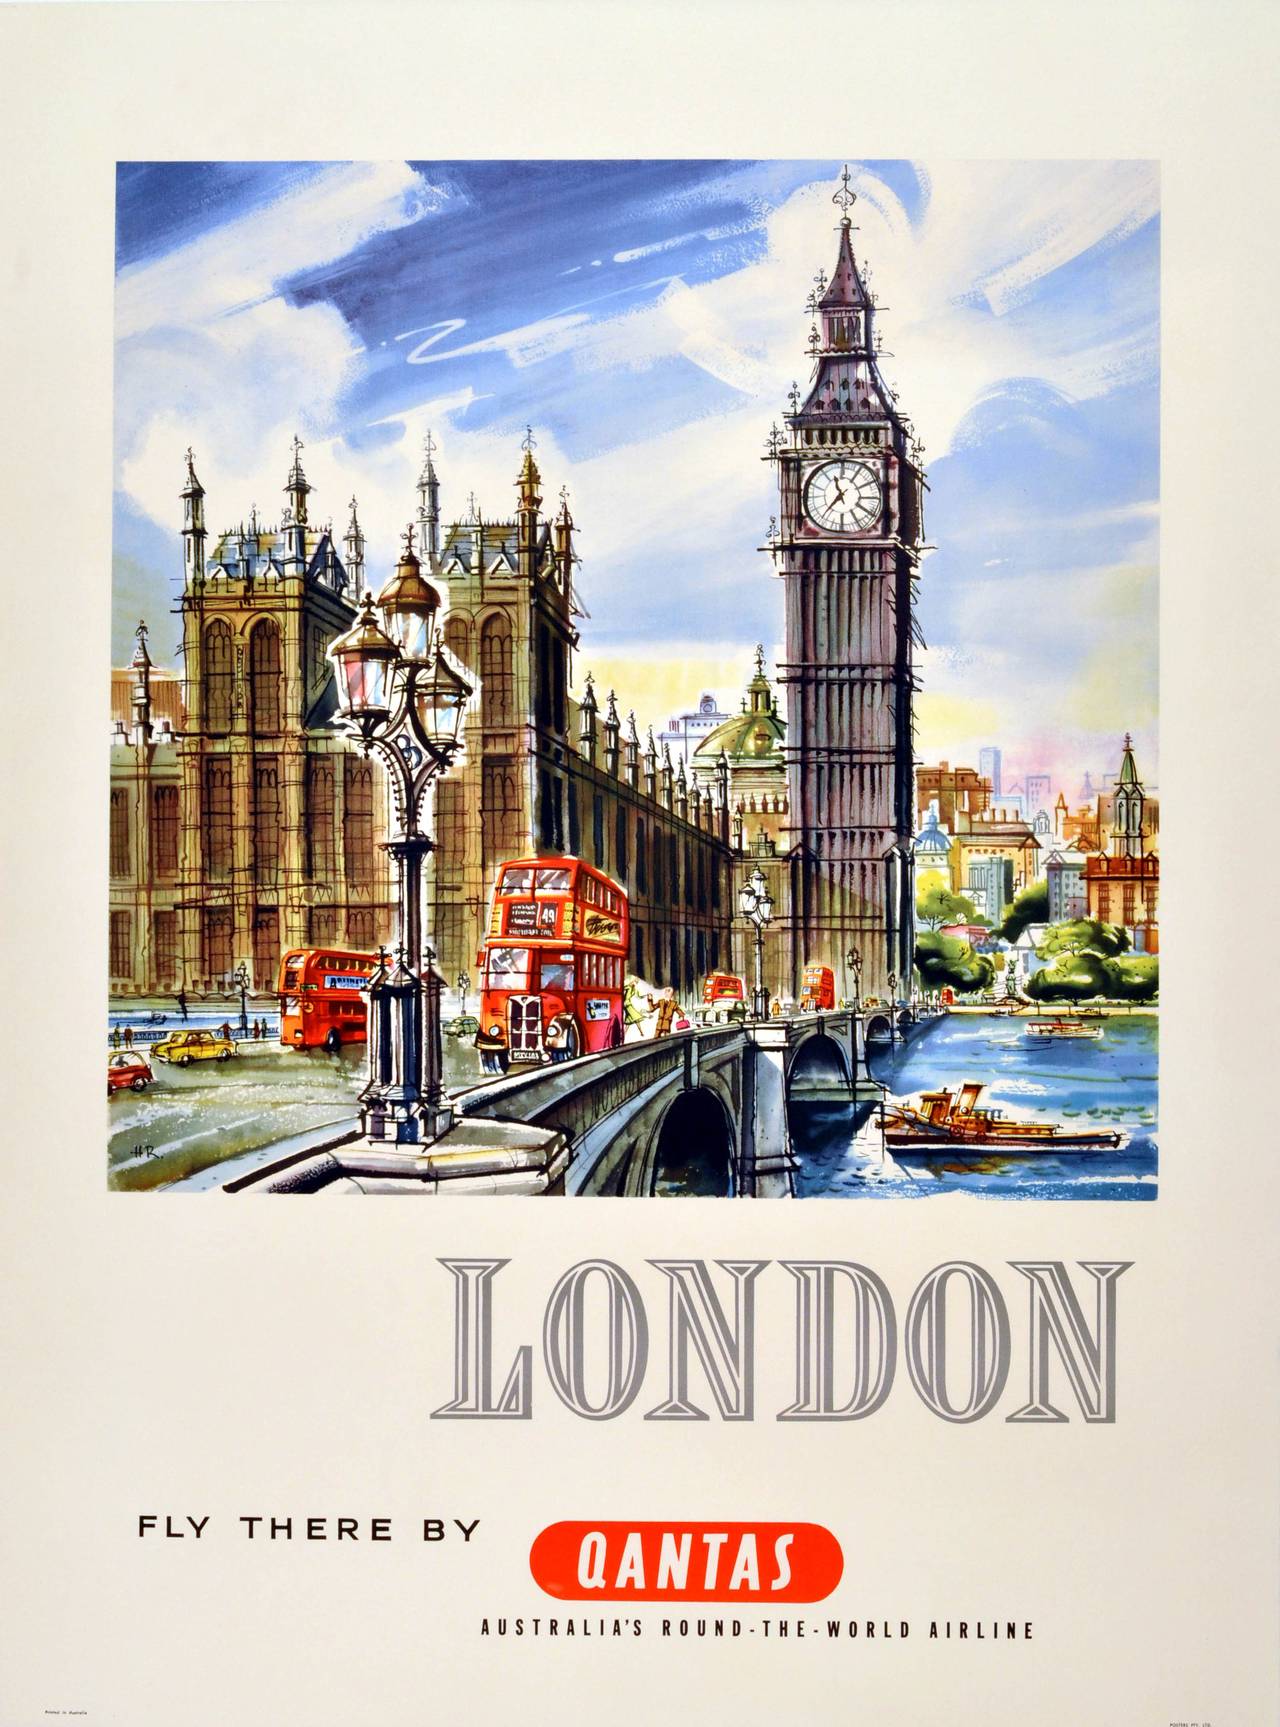 Harry Rogers Print - Original 1950s Vintage Travel Advertising Poster: London - Fly There By Qantas